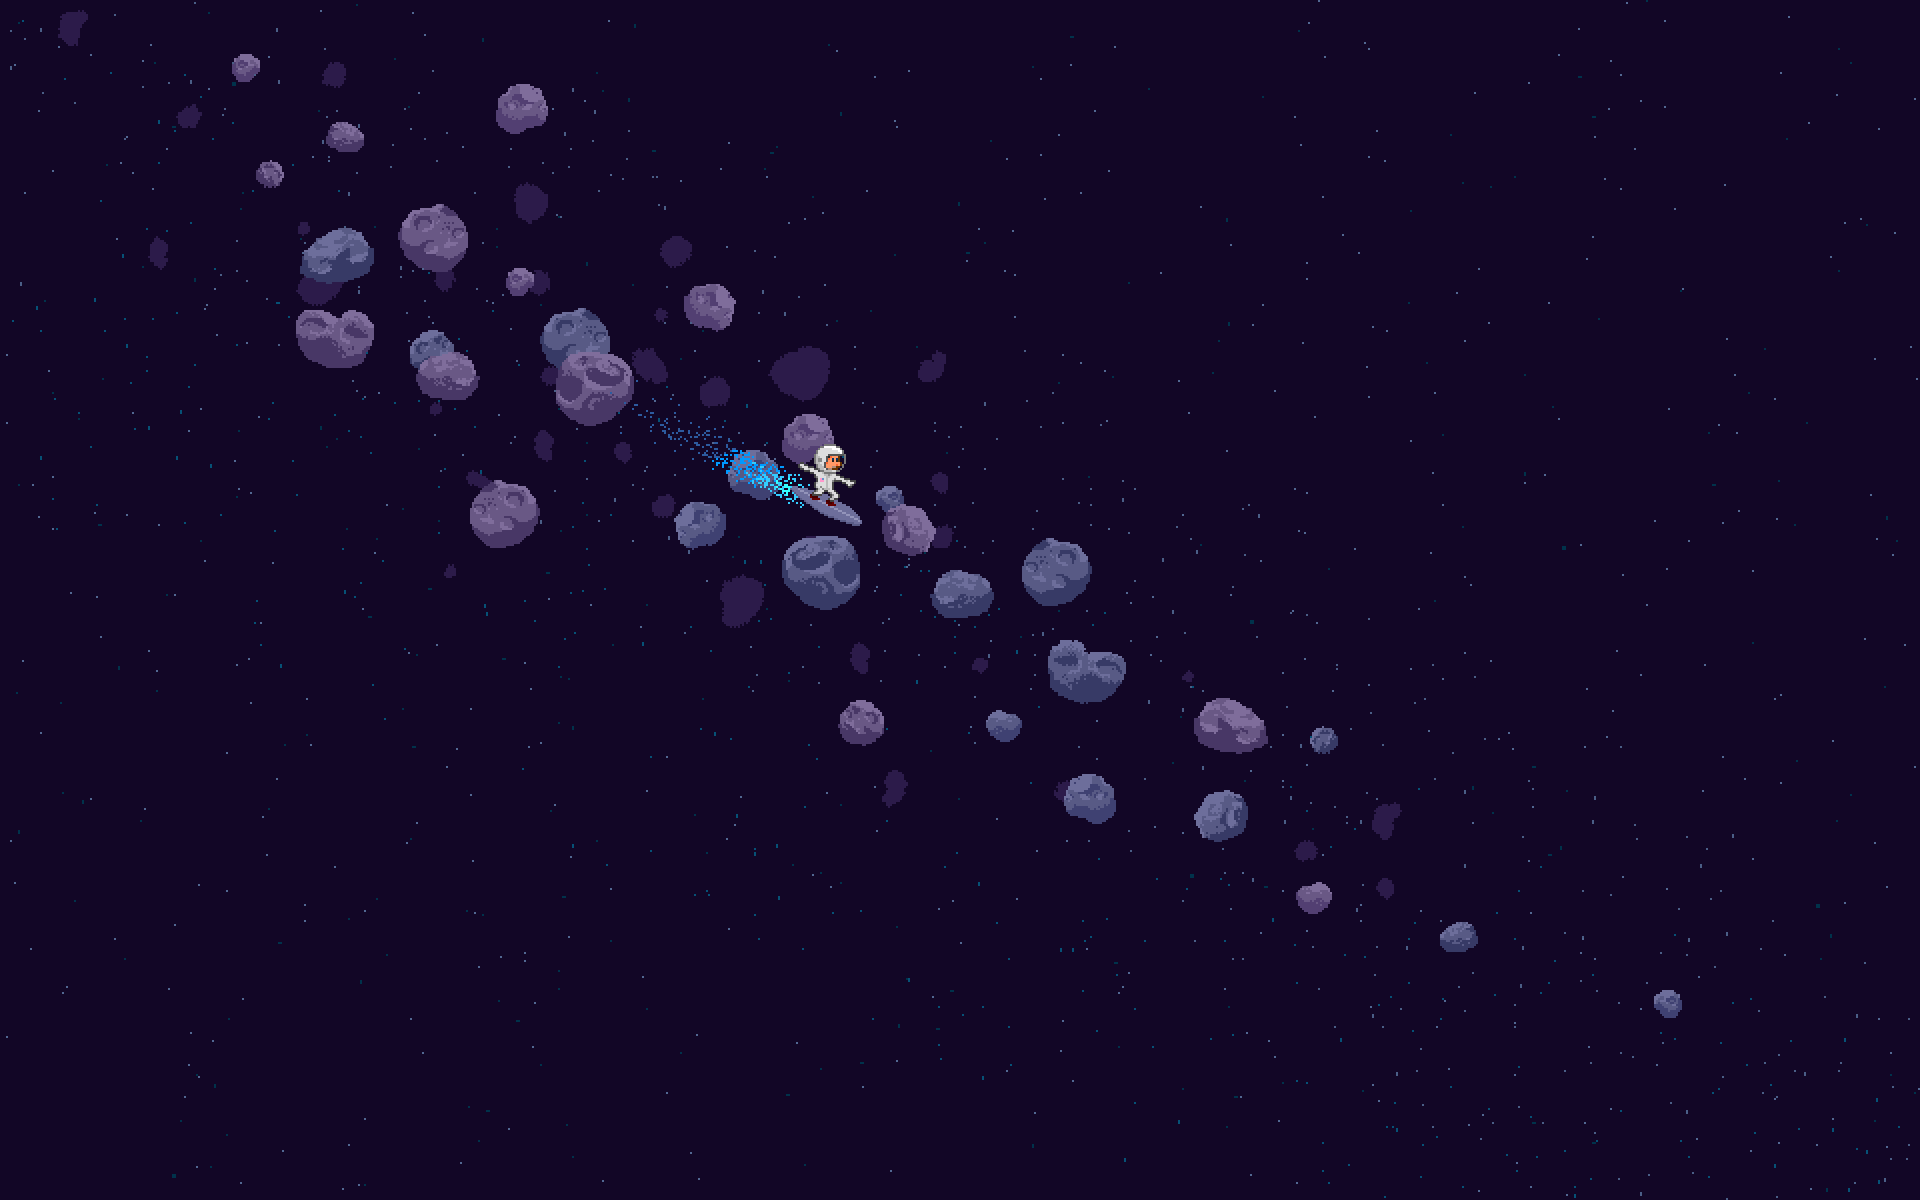 8 Bit Space Background. Awesome Space